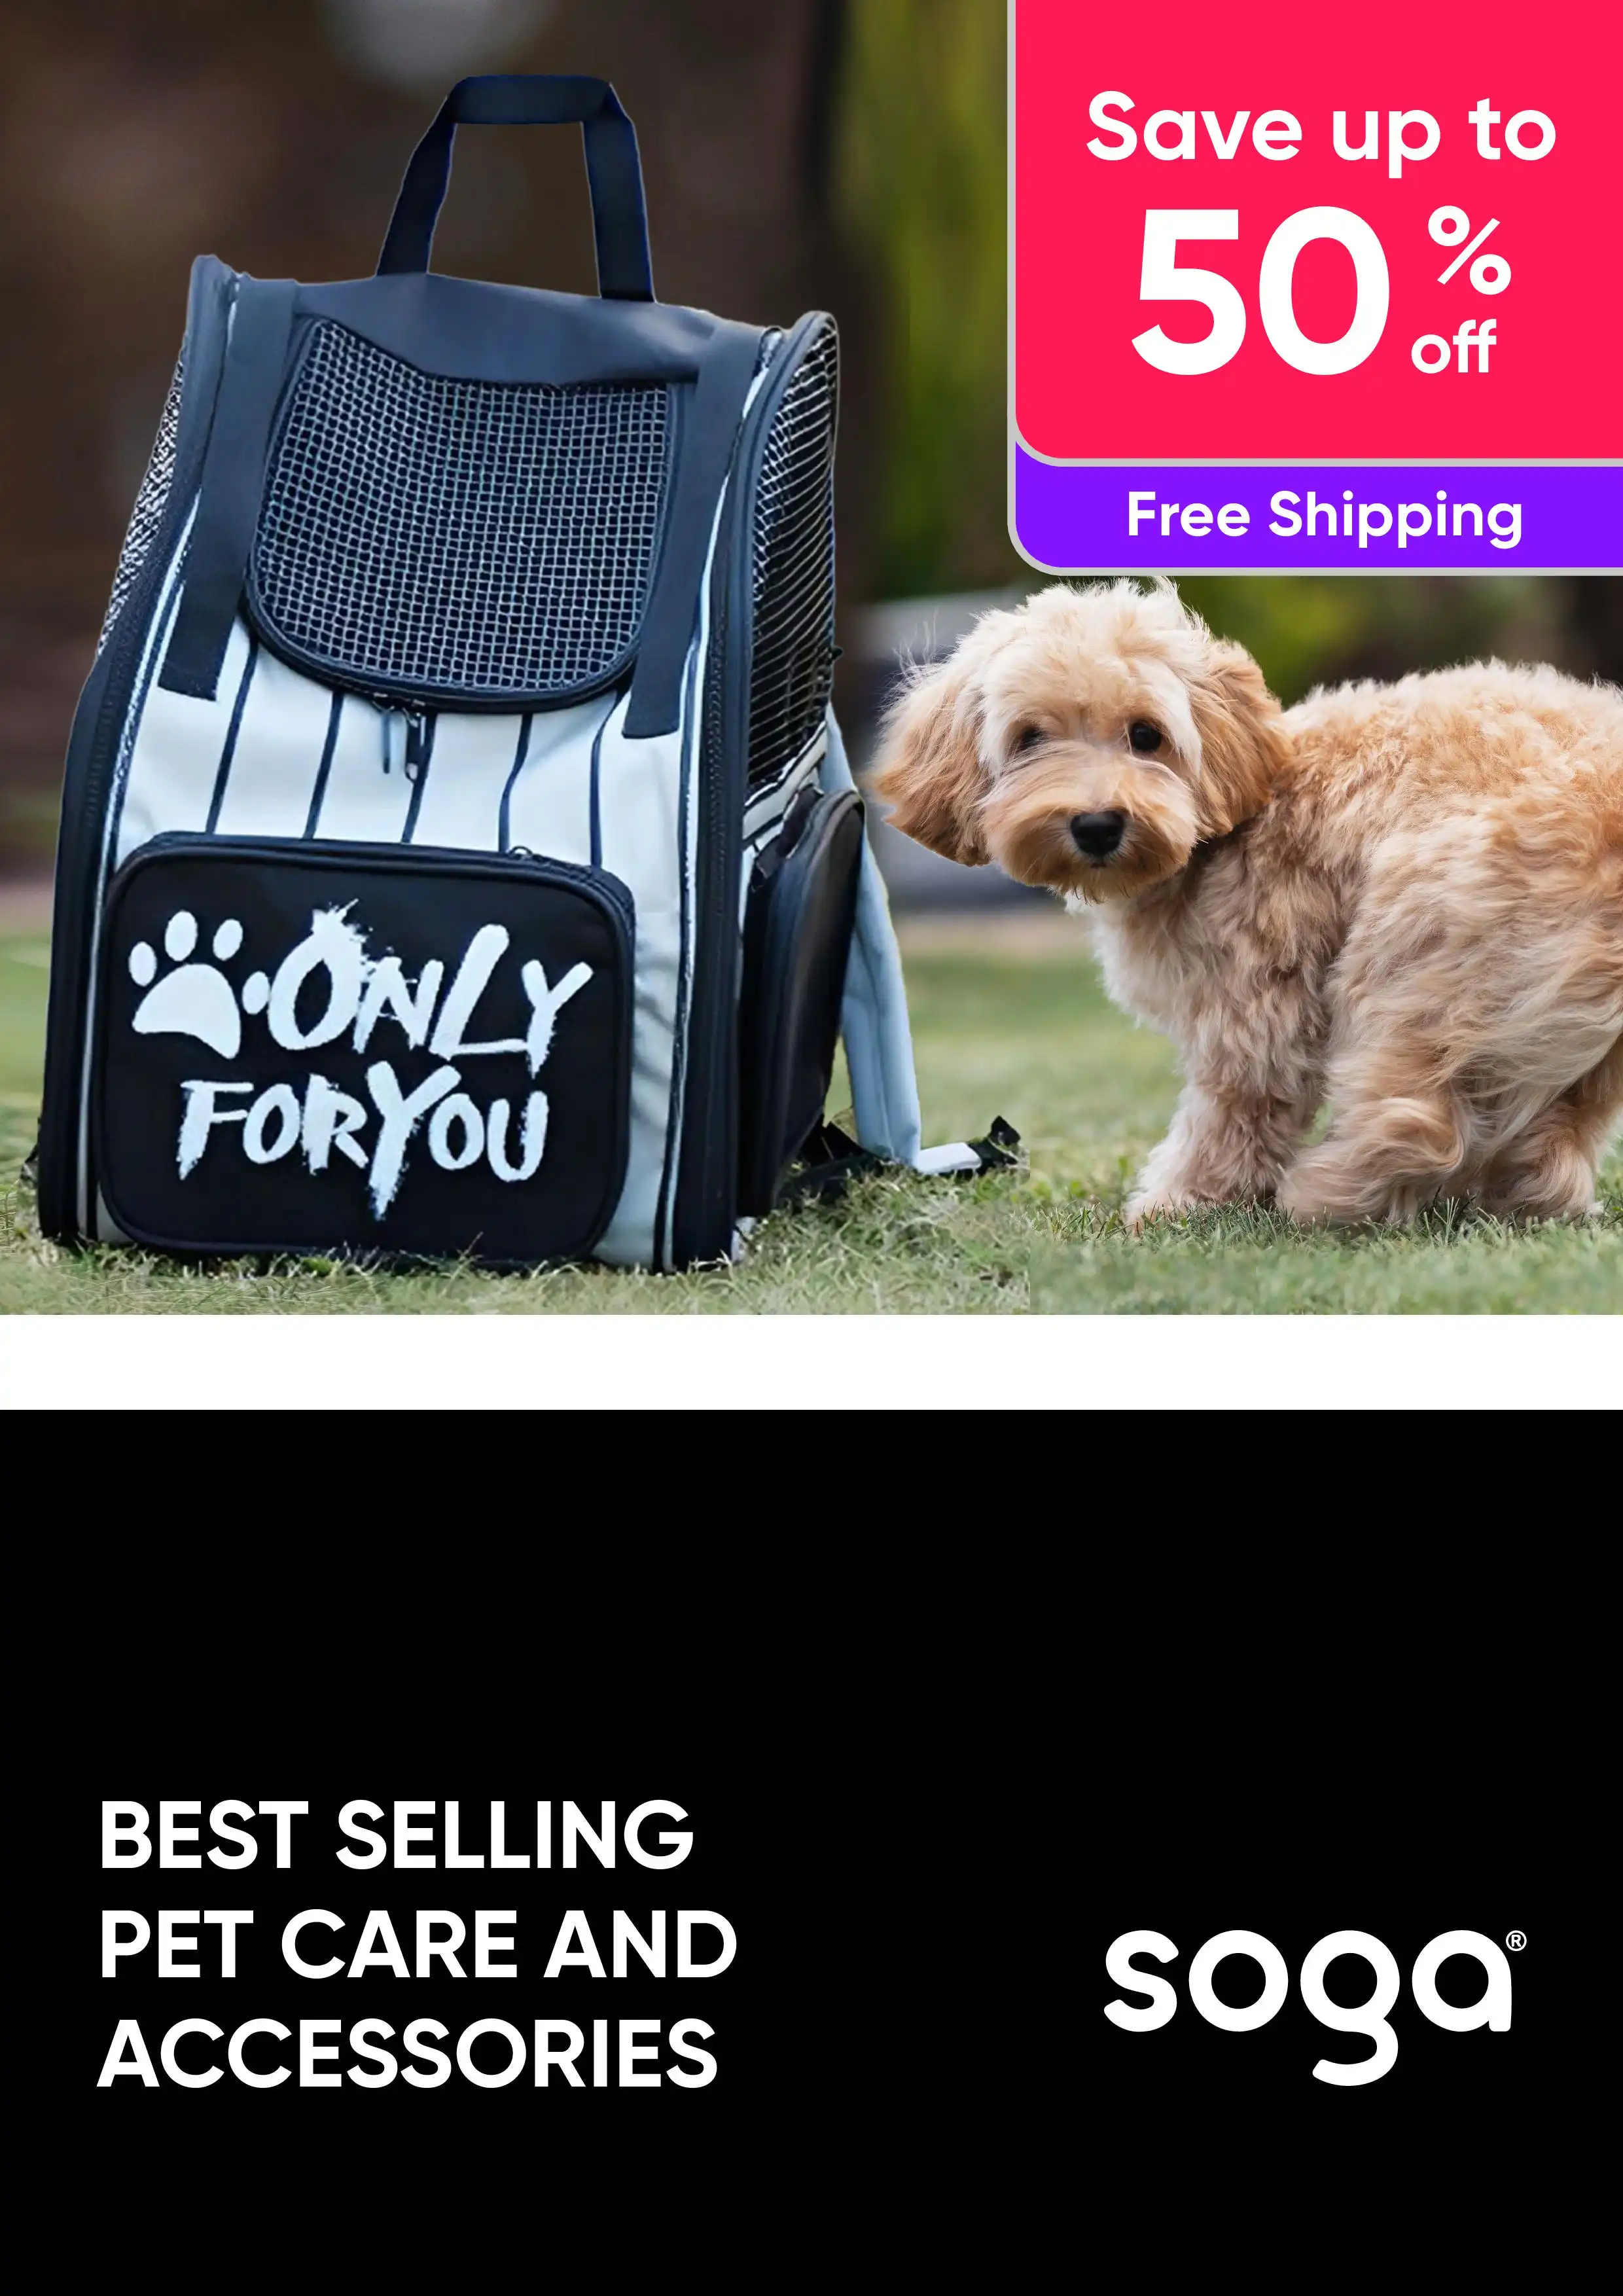 Best Selling Pet Care And Accessories - Save Up To 50% Off